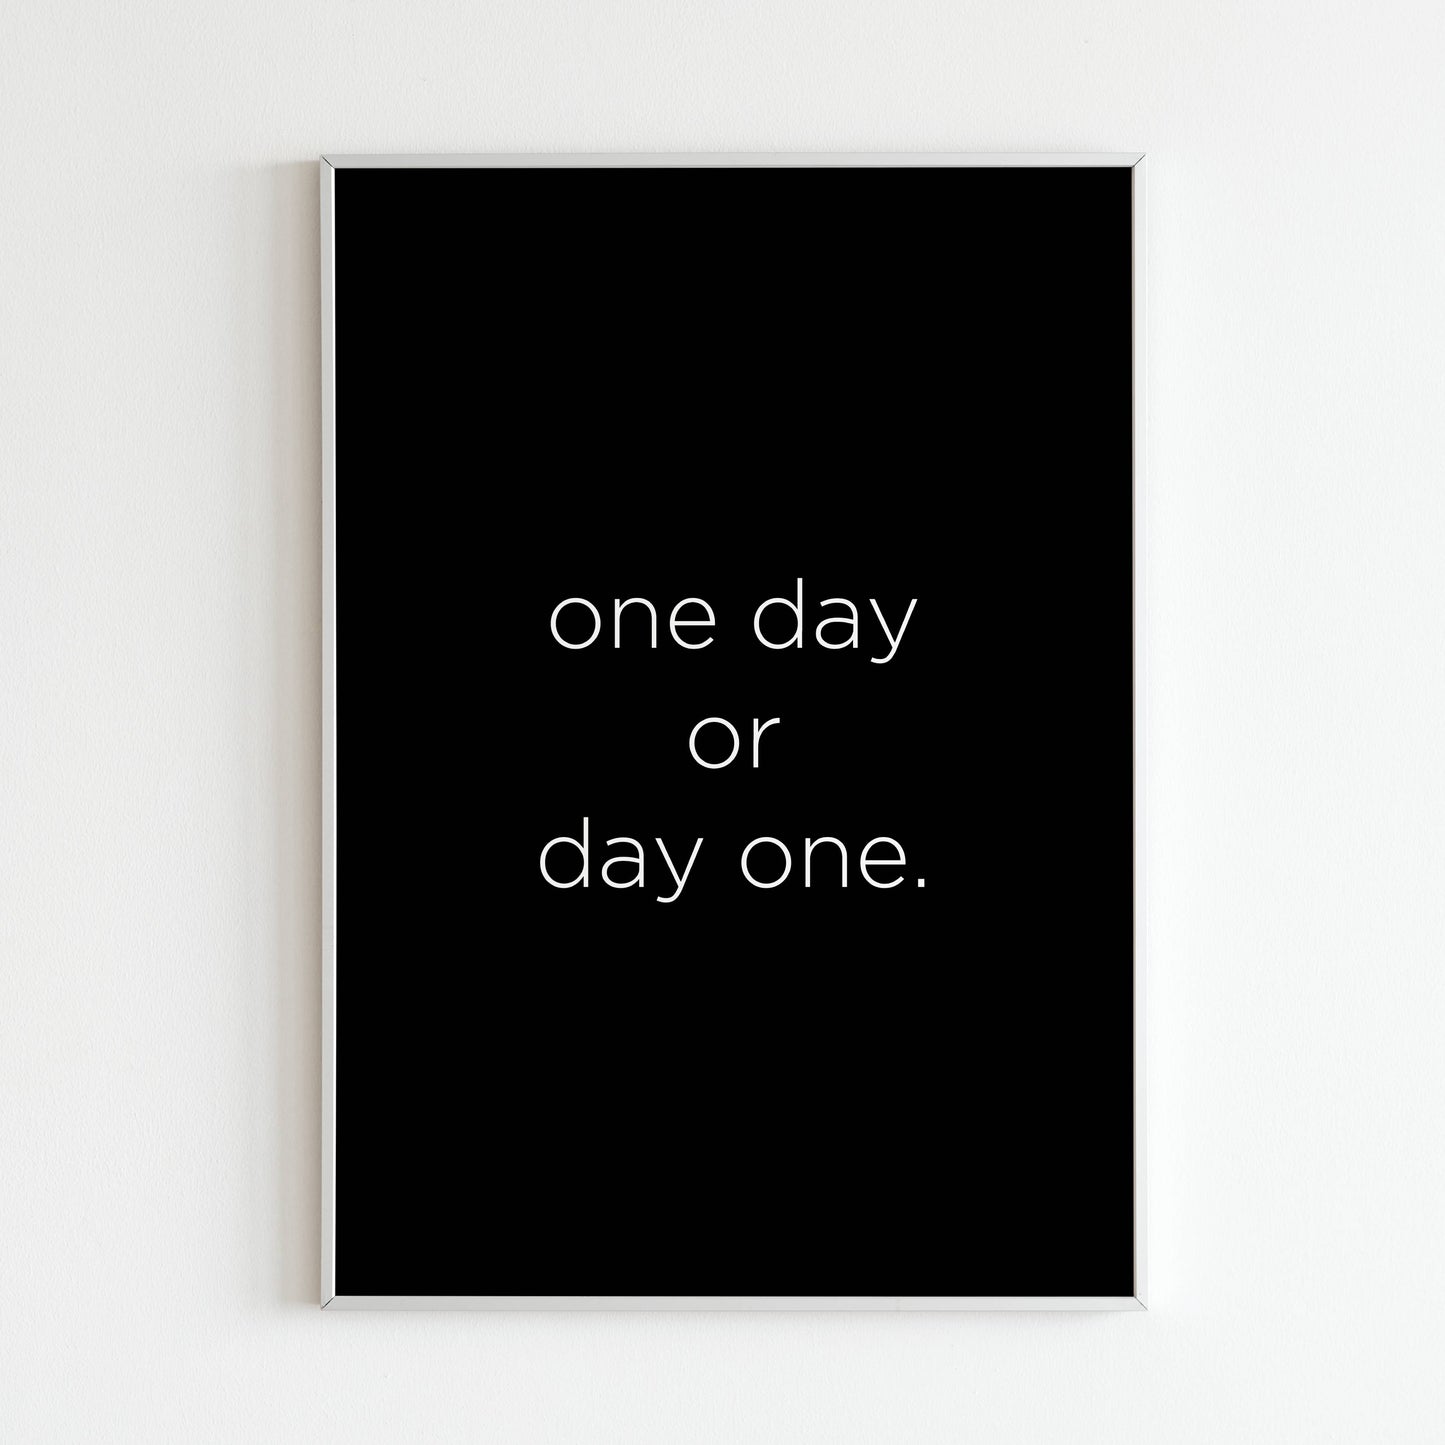 One day or day one close-up of printable wall art poster. Focus on the bold lettering and inspiring message.